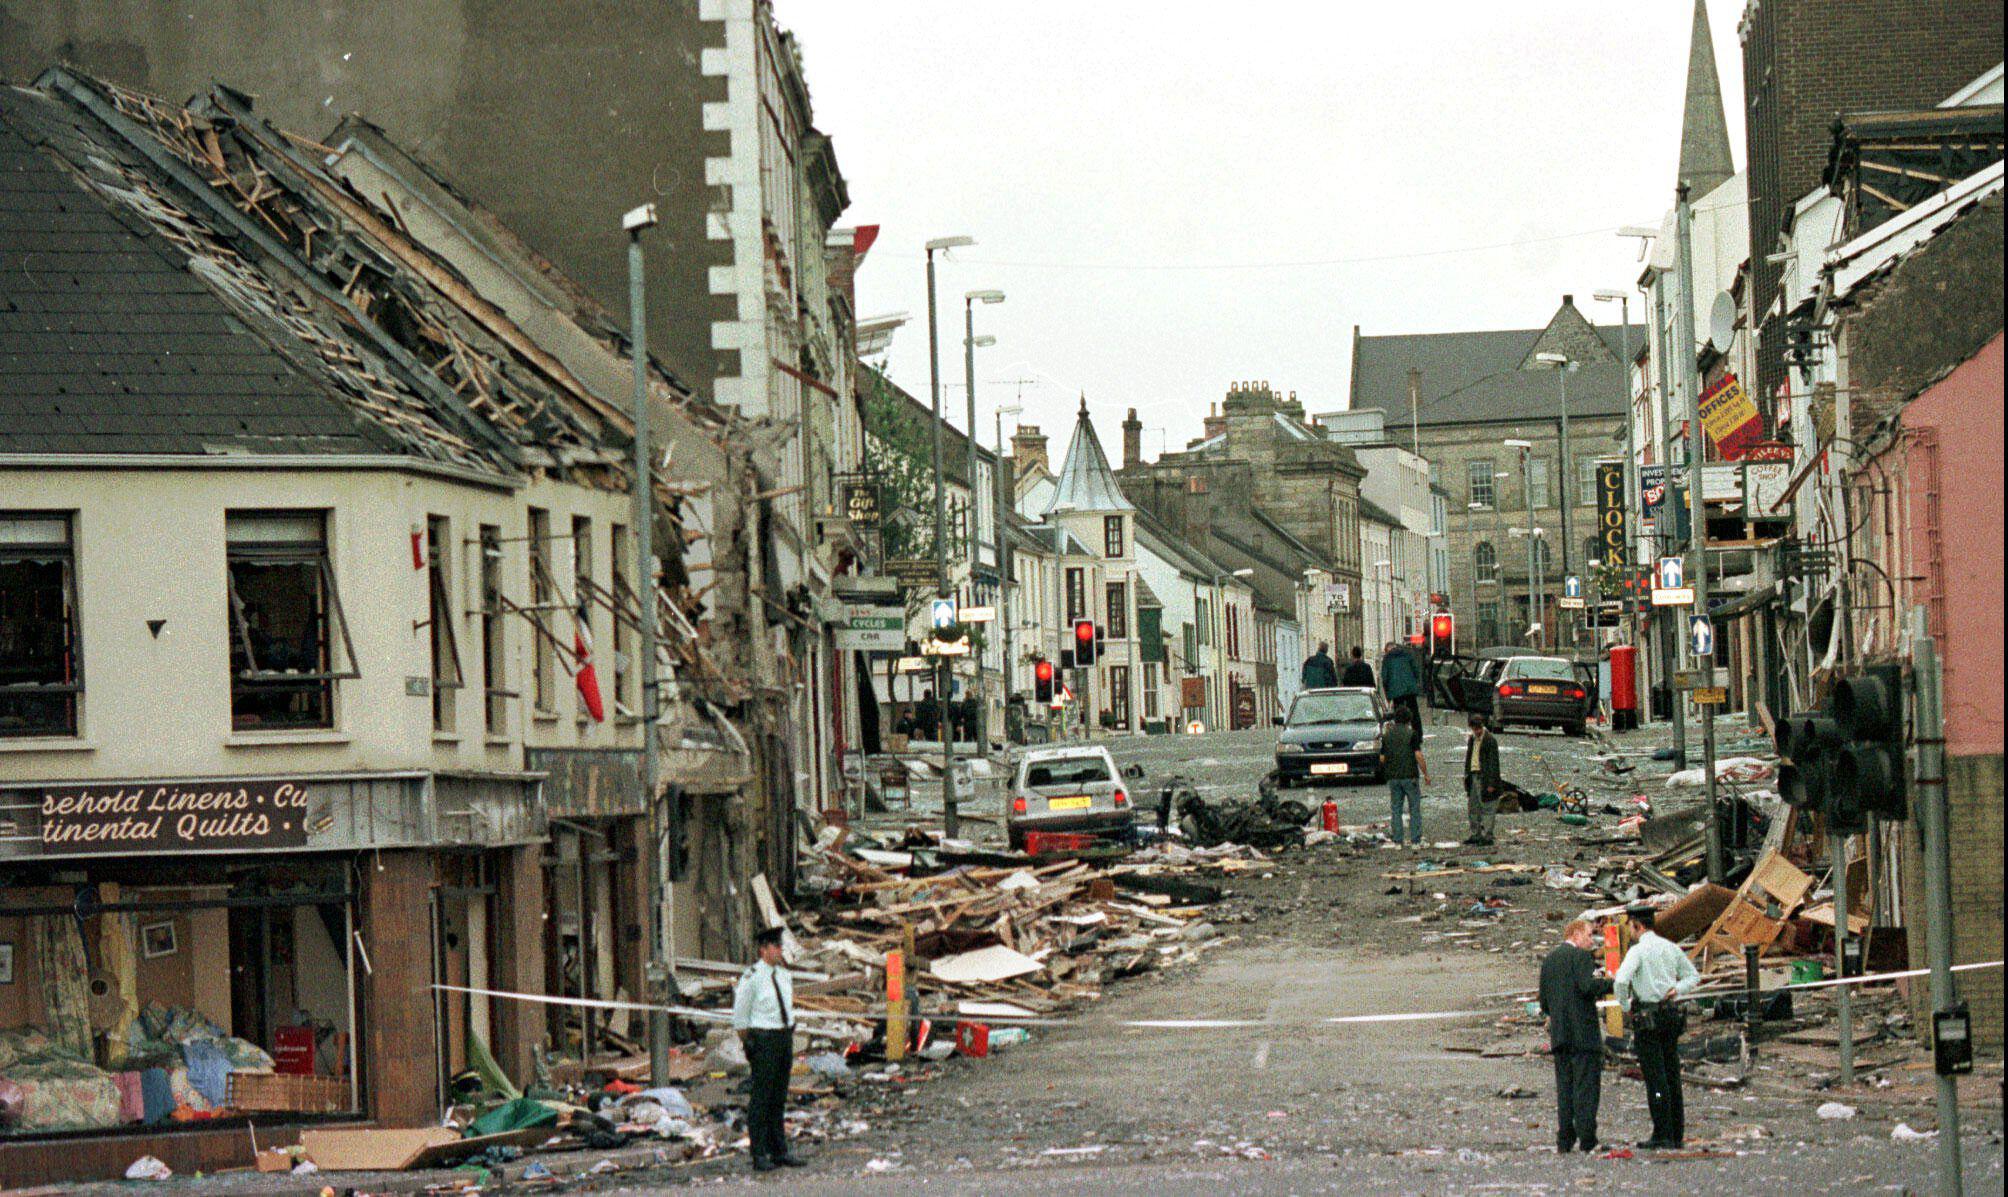 The scene of the car bombing in the centre of Omagh, Co Tyrone (